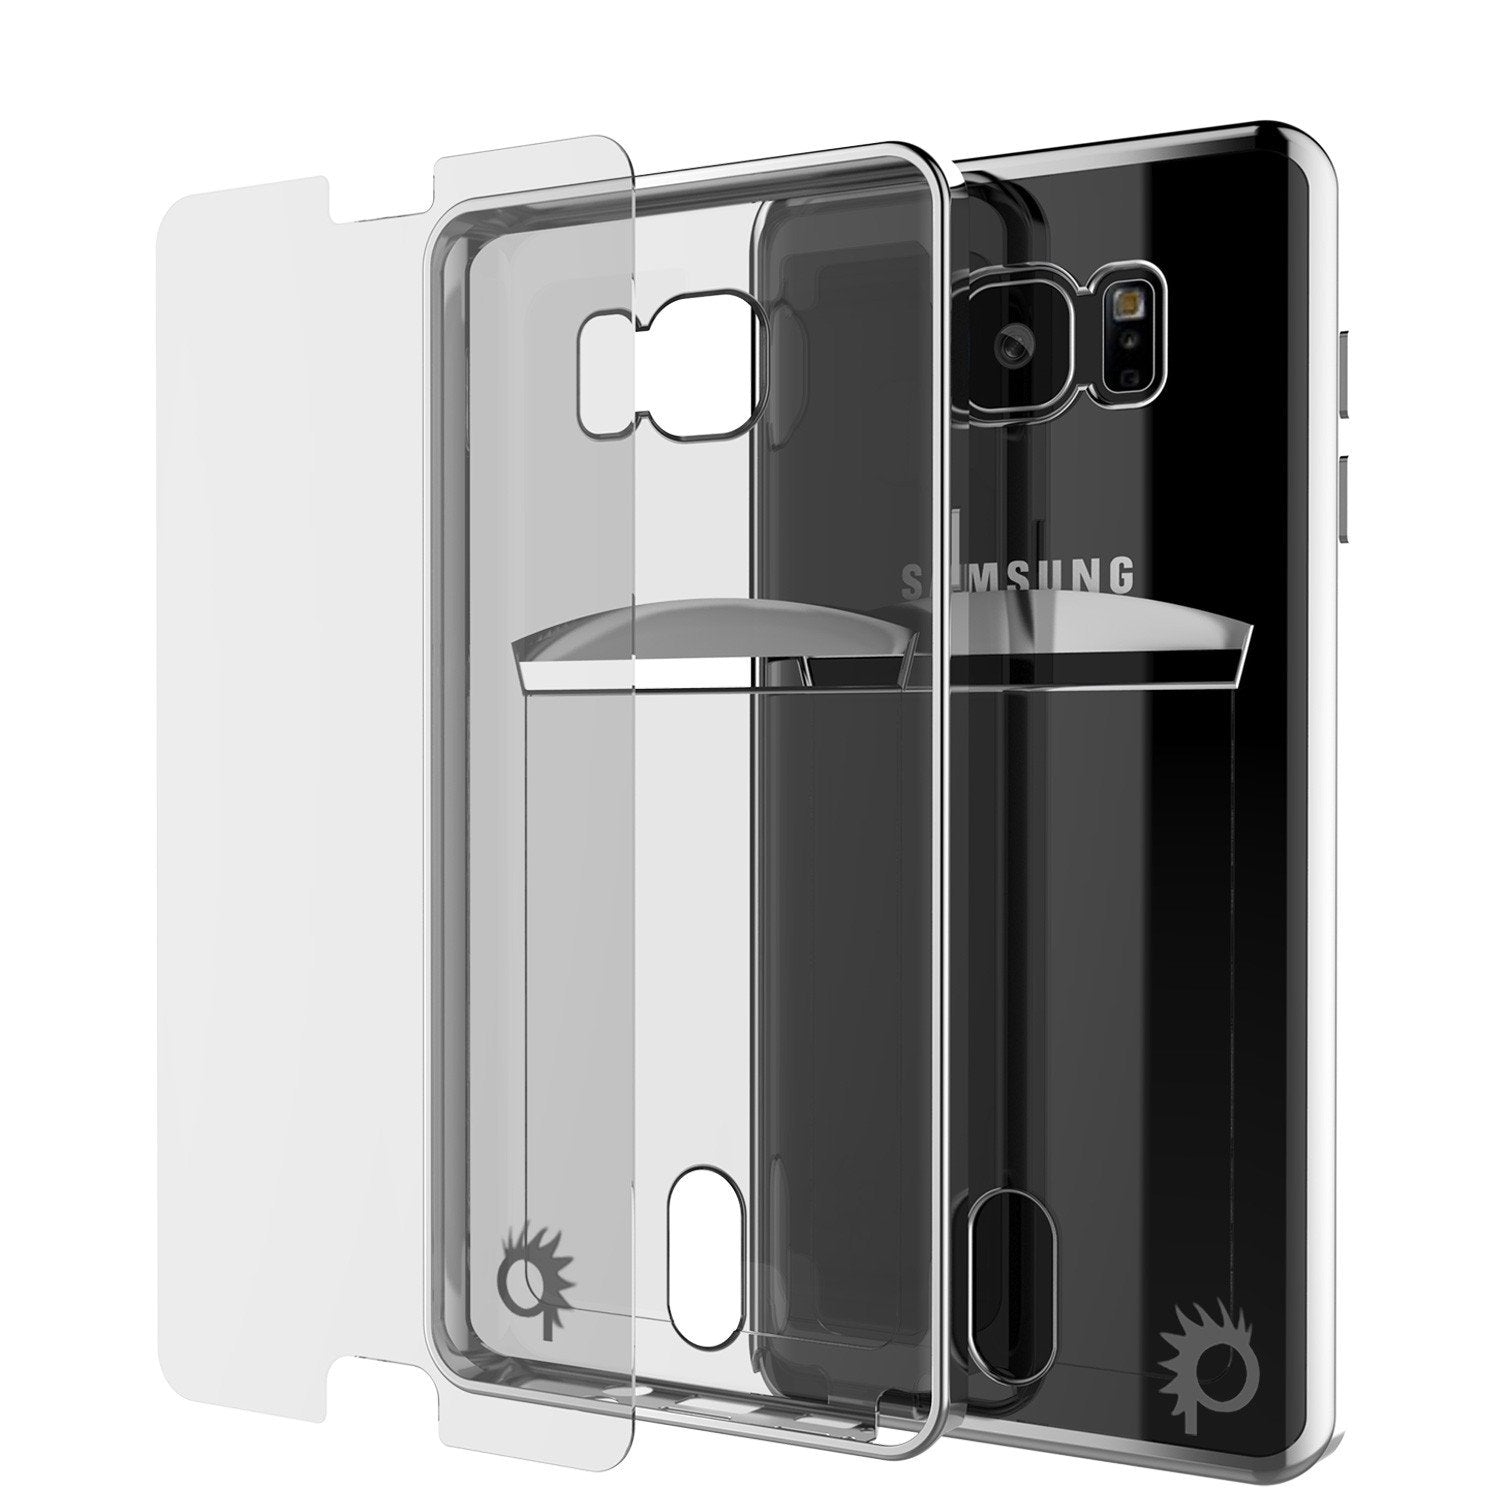 Galaxy Note 5 Case, PUNKCASE® LUCID Silver Series | Card Slot | SHIELD Screen Protector | Ultra fit